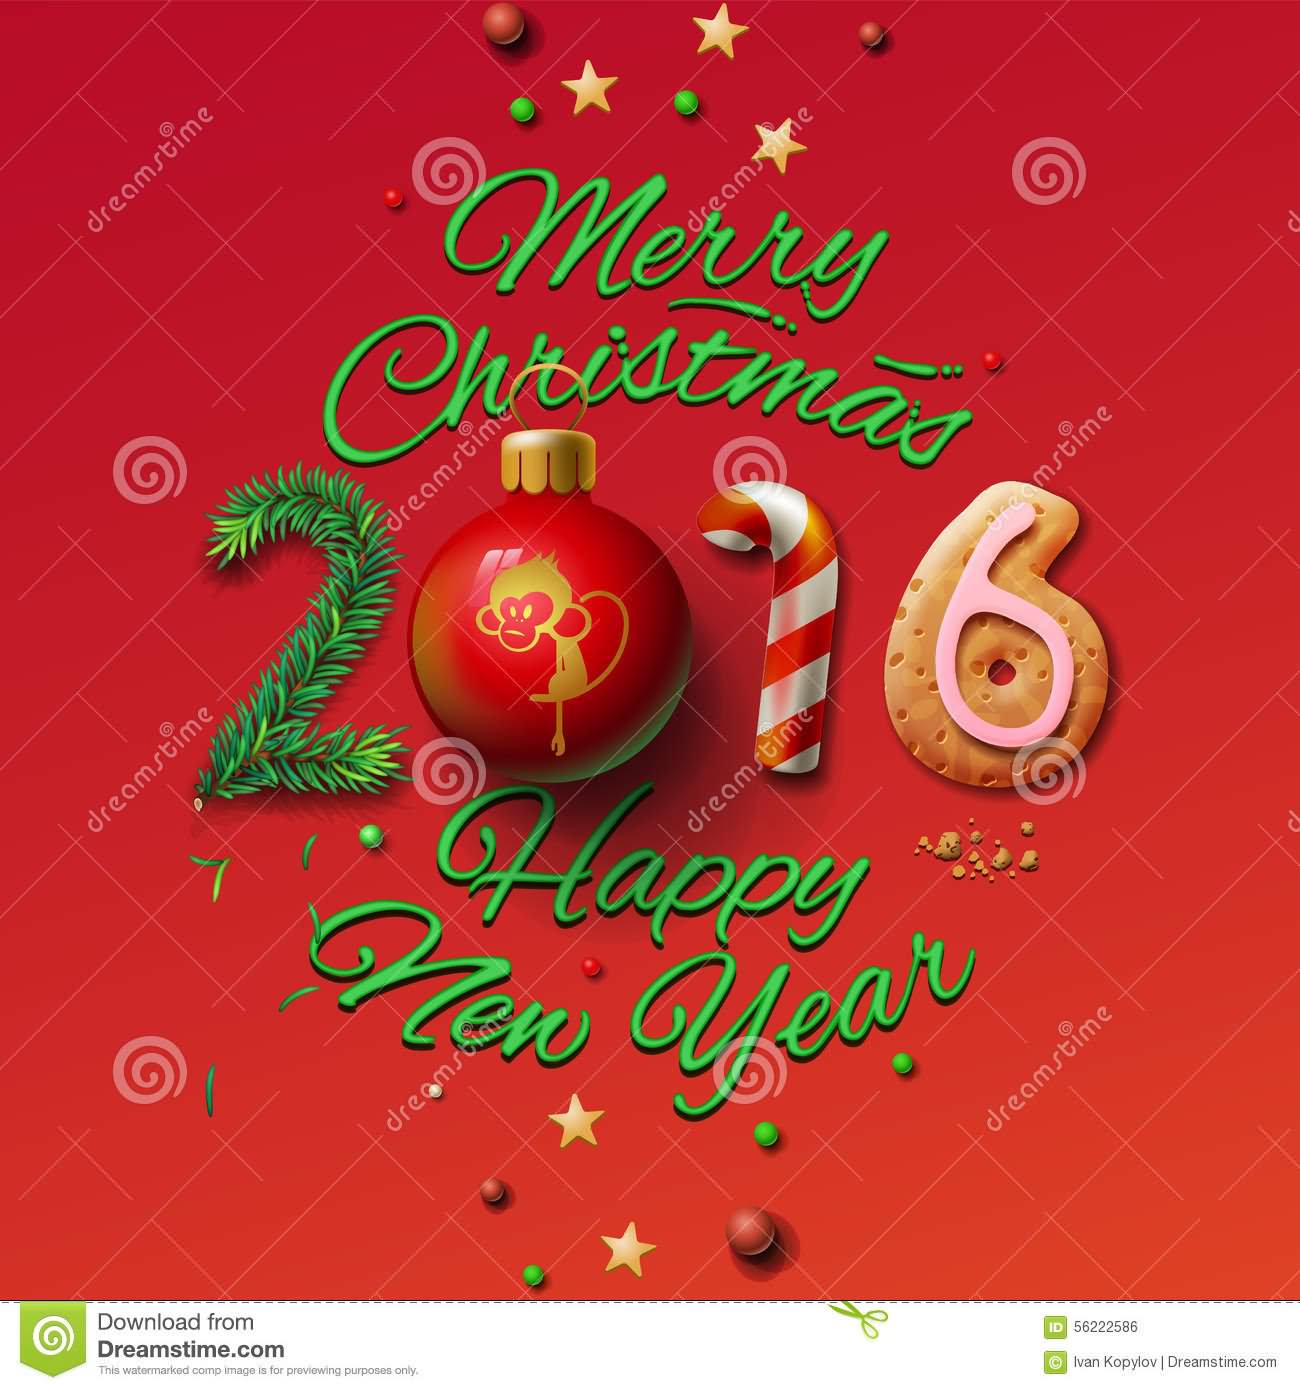 Merry Christmas Happy New Year 2016 Greeting Card